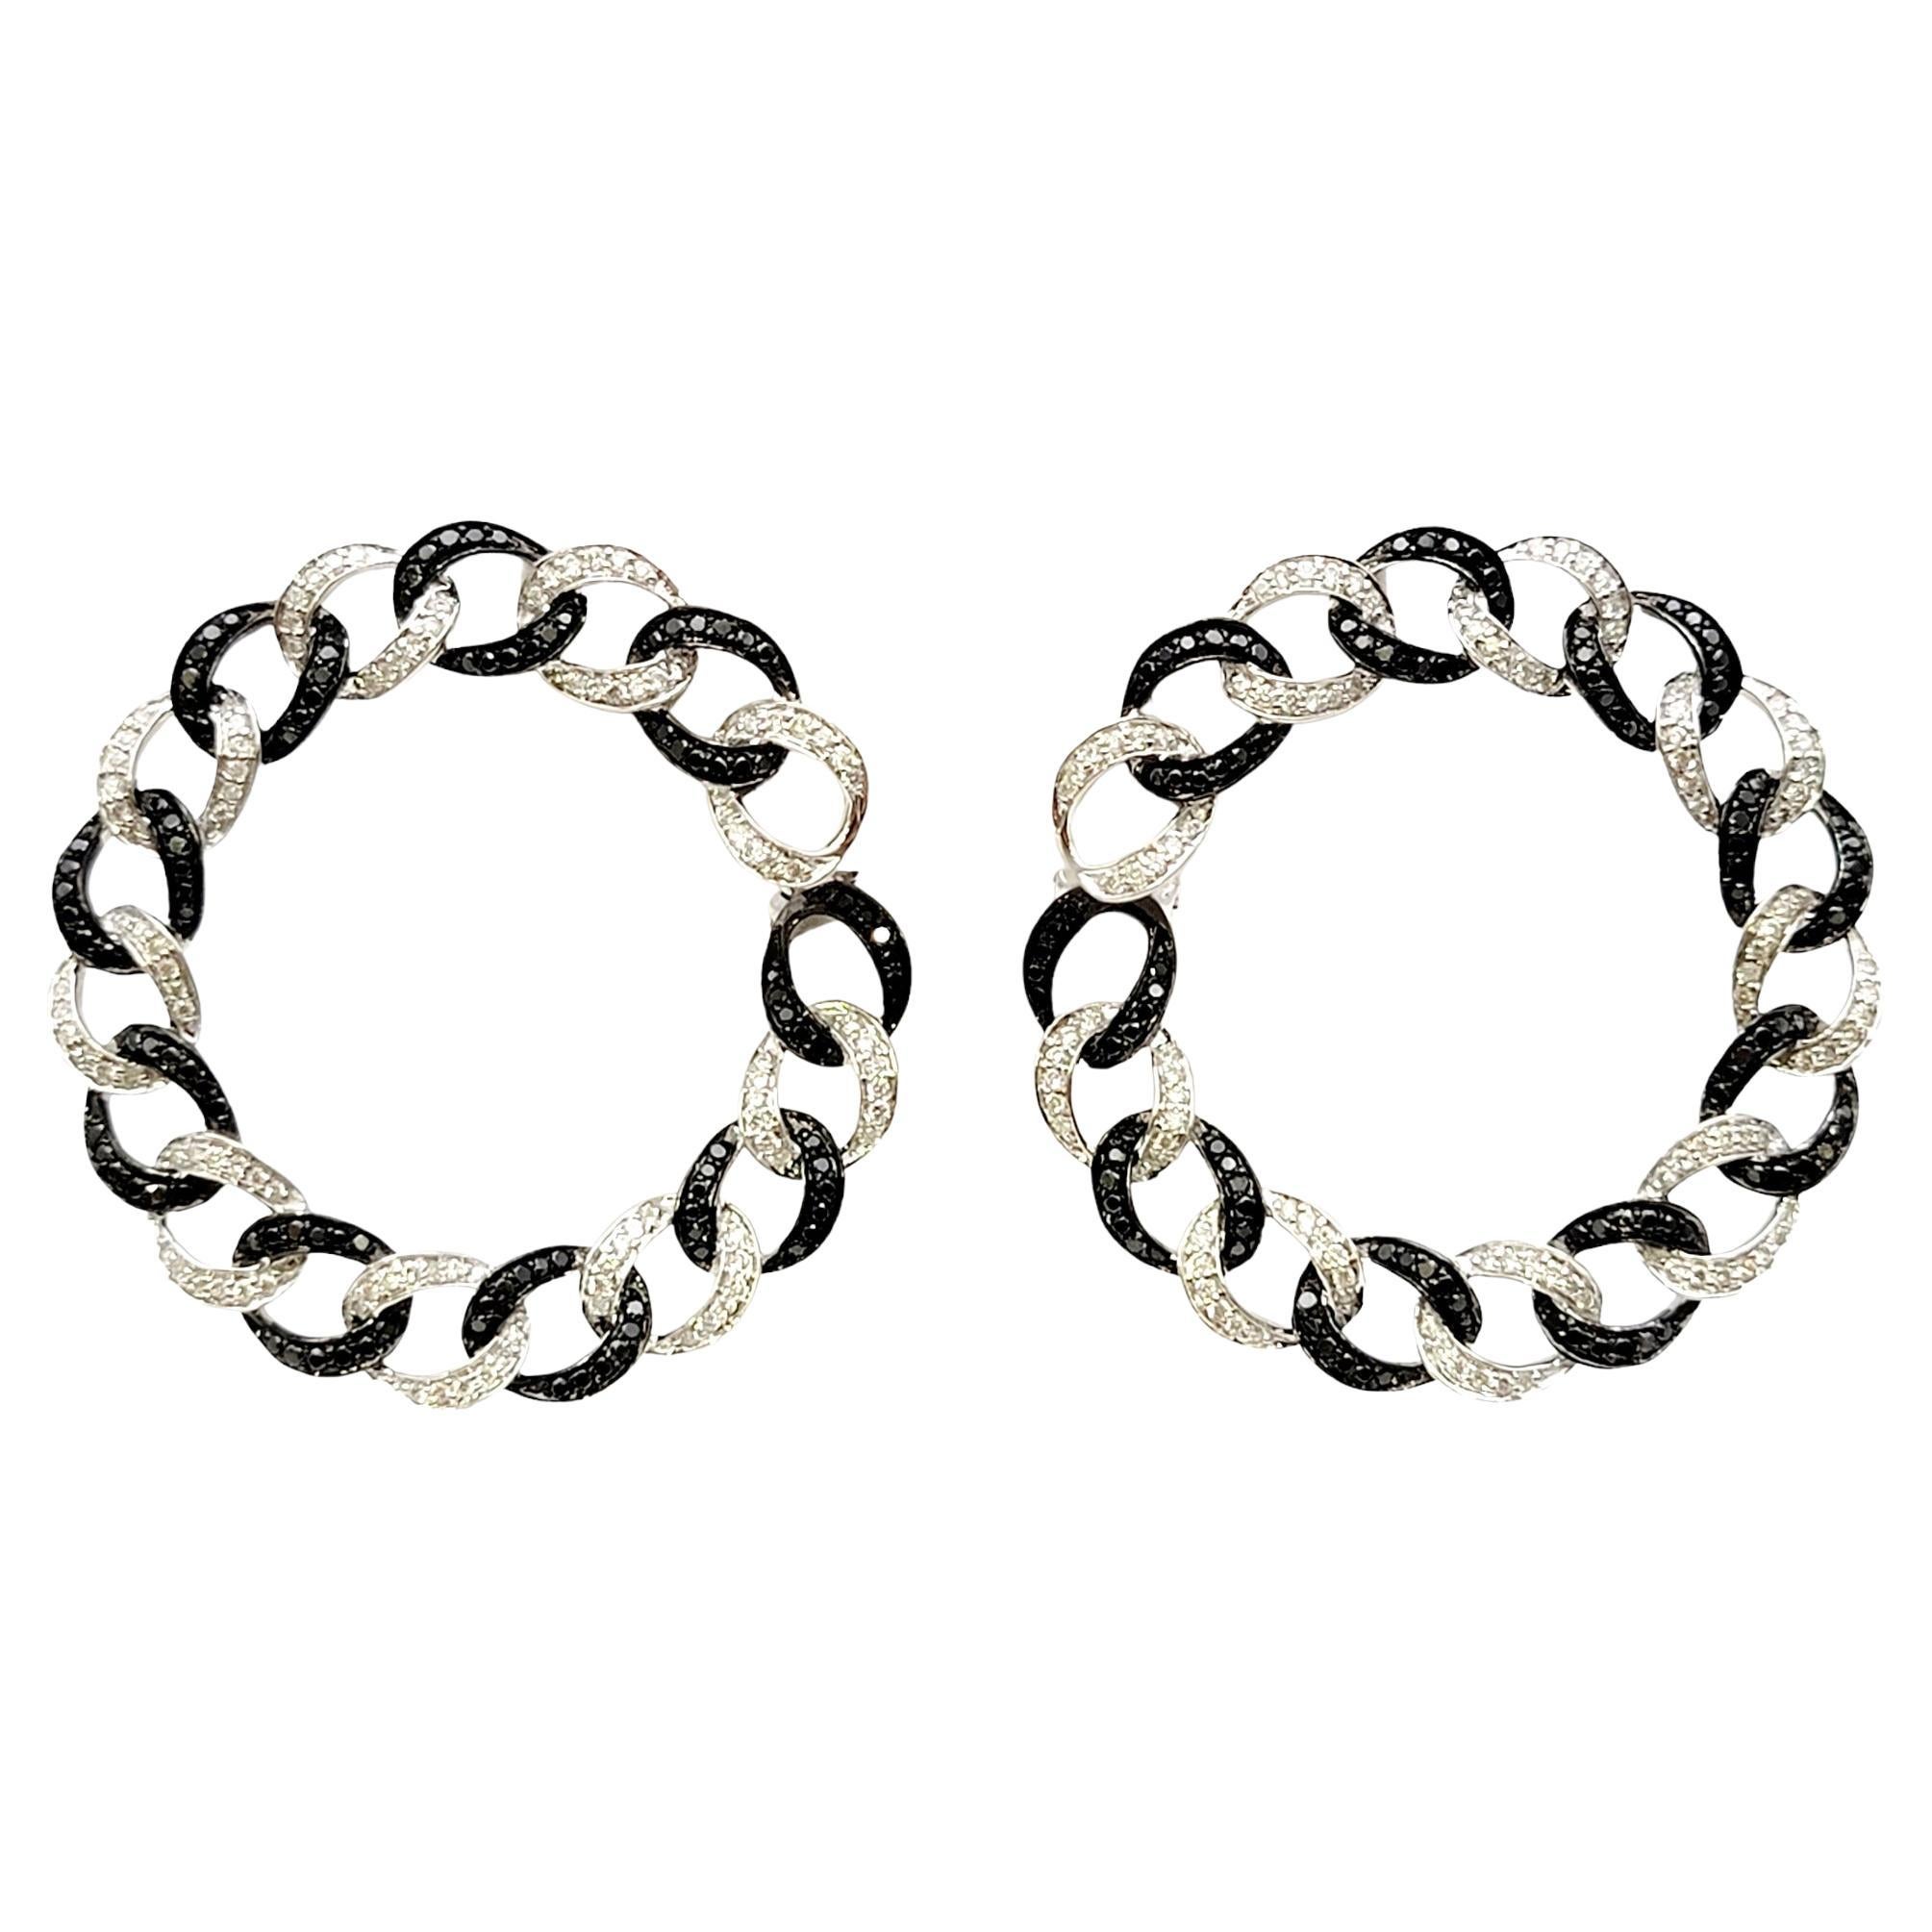 Black and White Pave Diamond Circular Link Front Hoop Earrings in 14 Karat Gold In Excellent Condition For Sale In Scottsdale, AZ